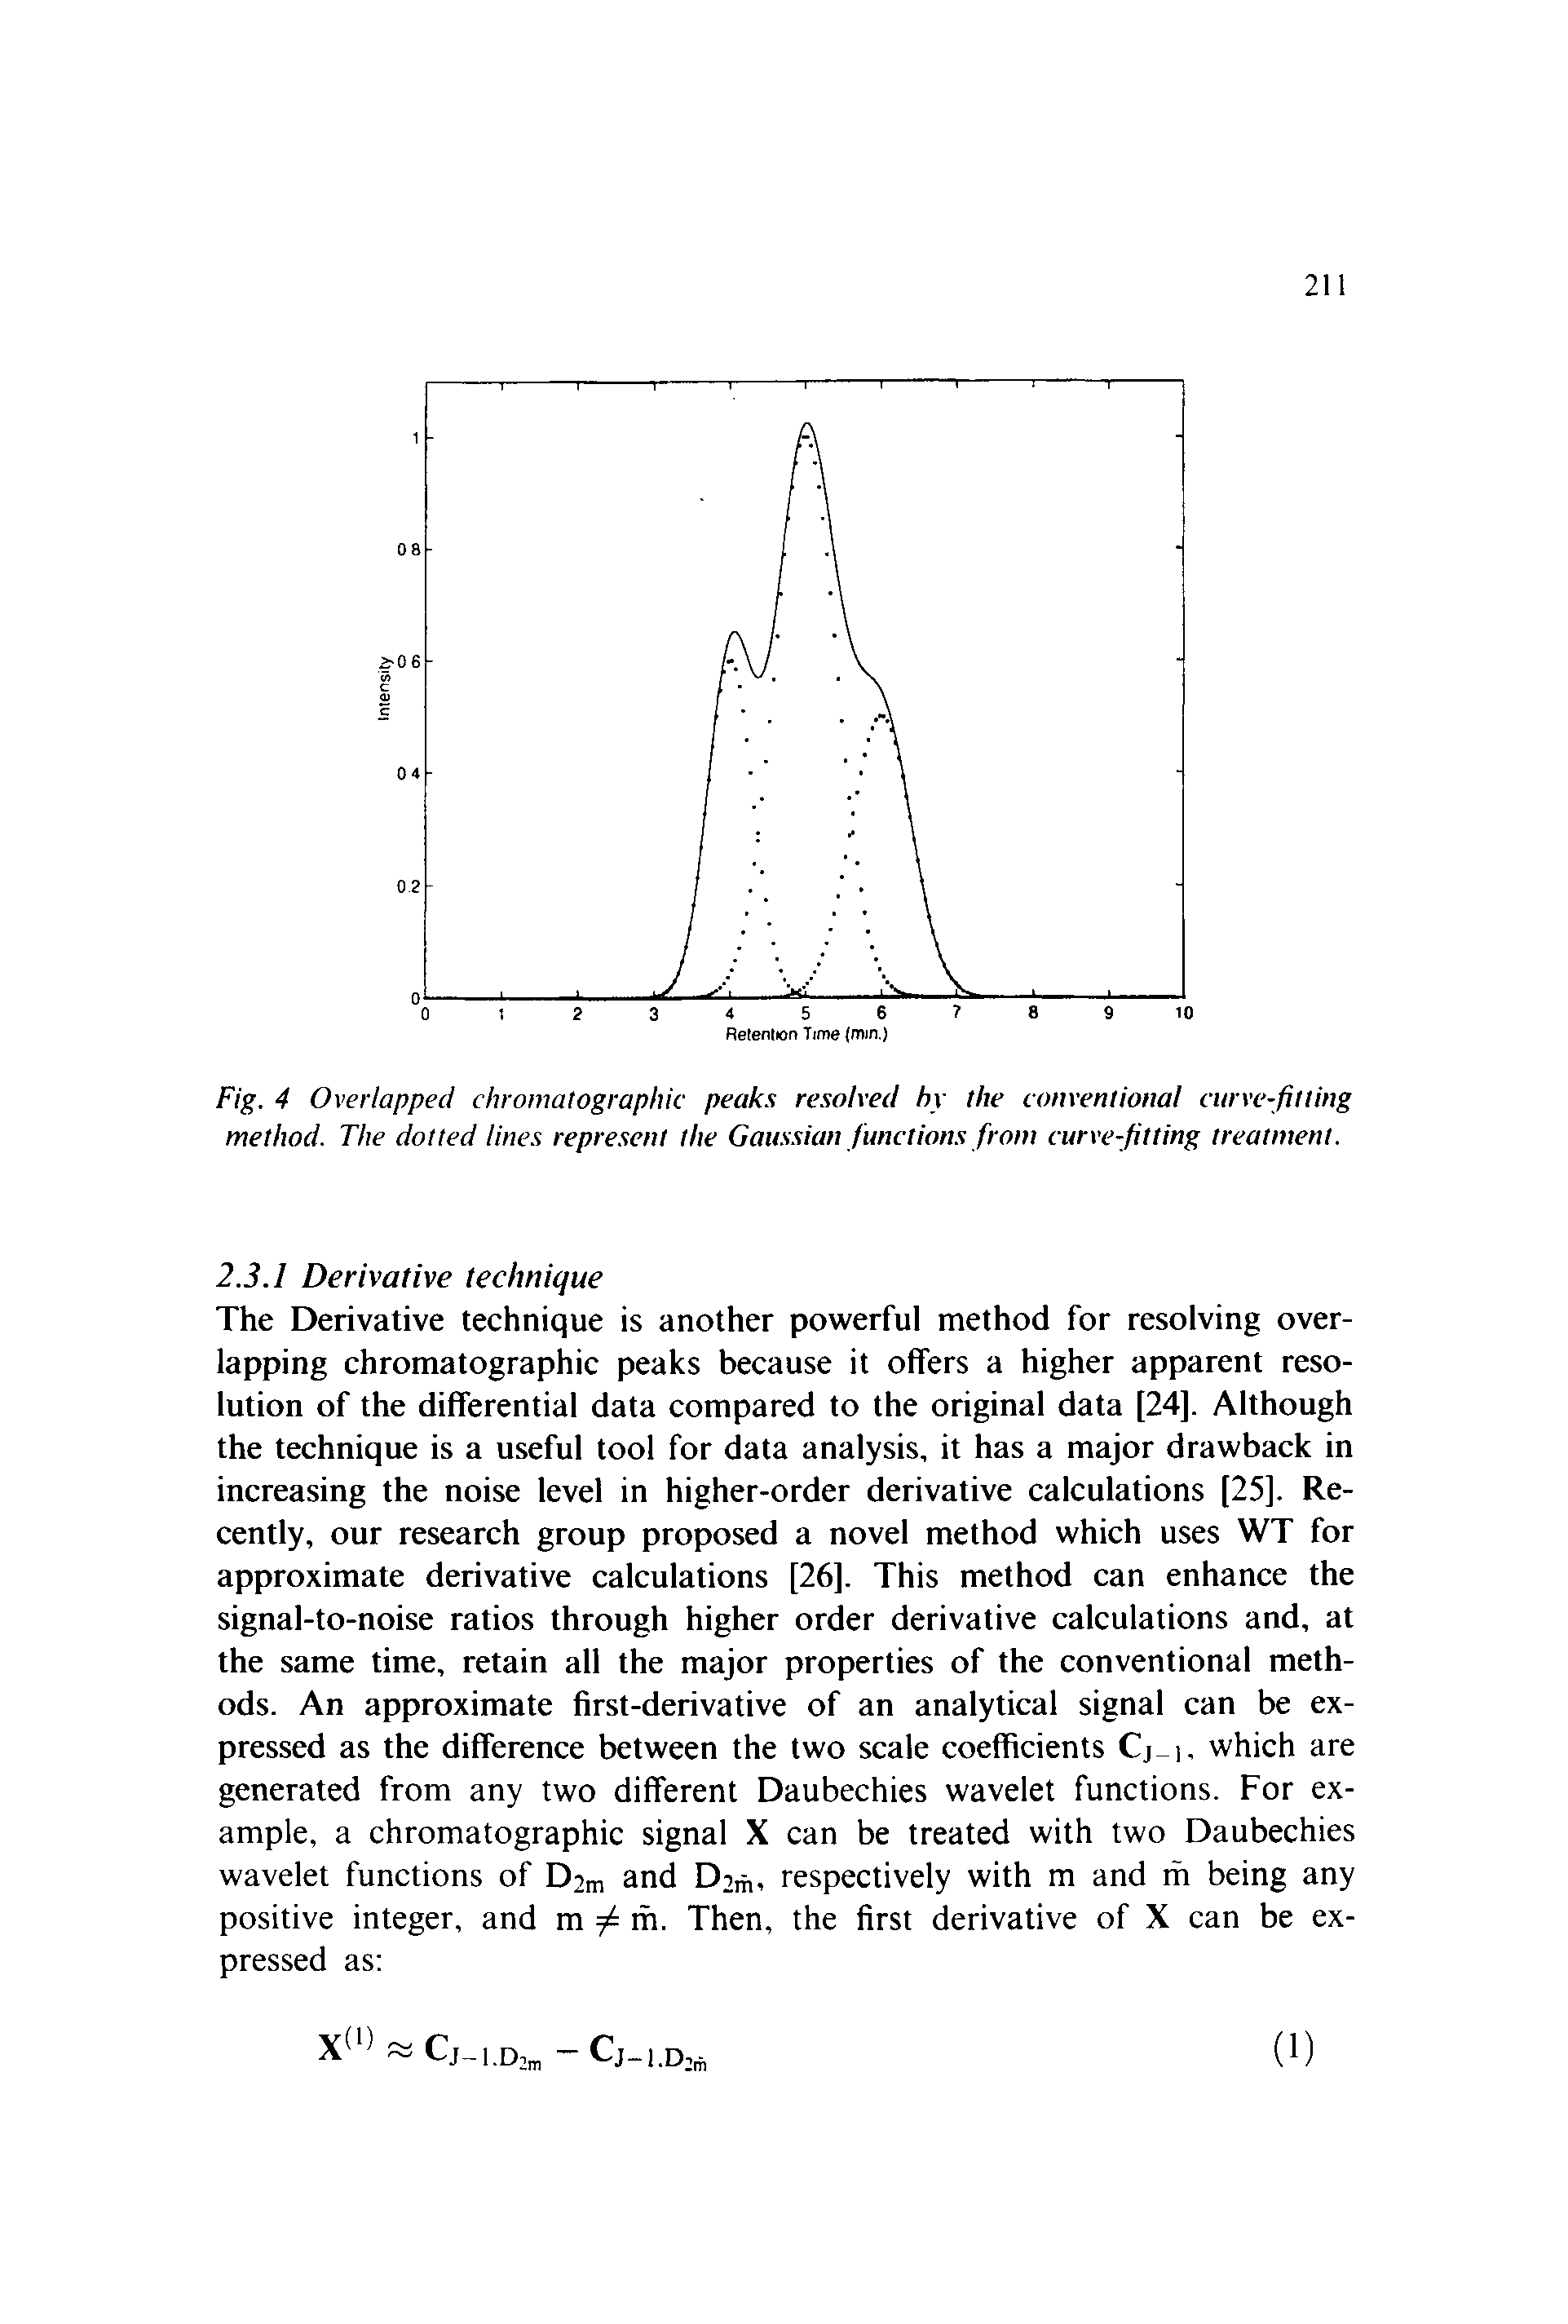 Fig. 4 Overlapped chromatographic peaks resolved by the conventional curve-fitting method. The dotted lines represent the Gaussian functions from curve-fitting treatment.